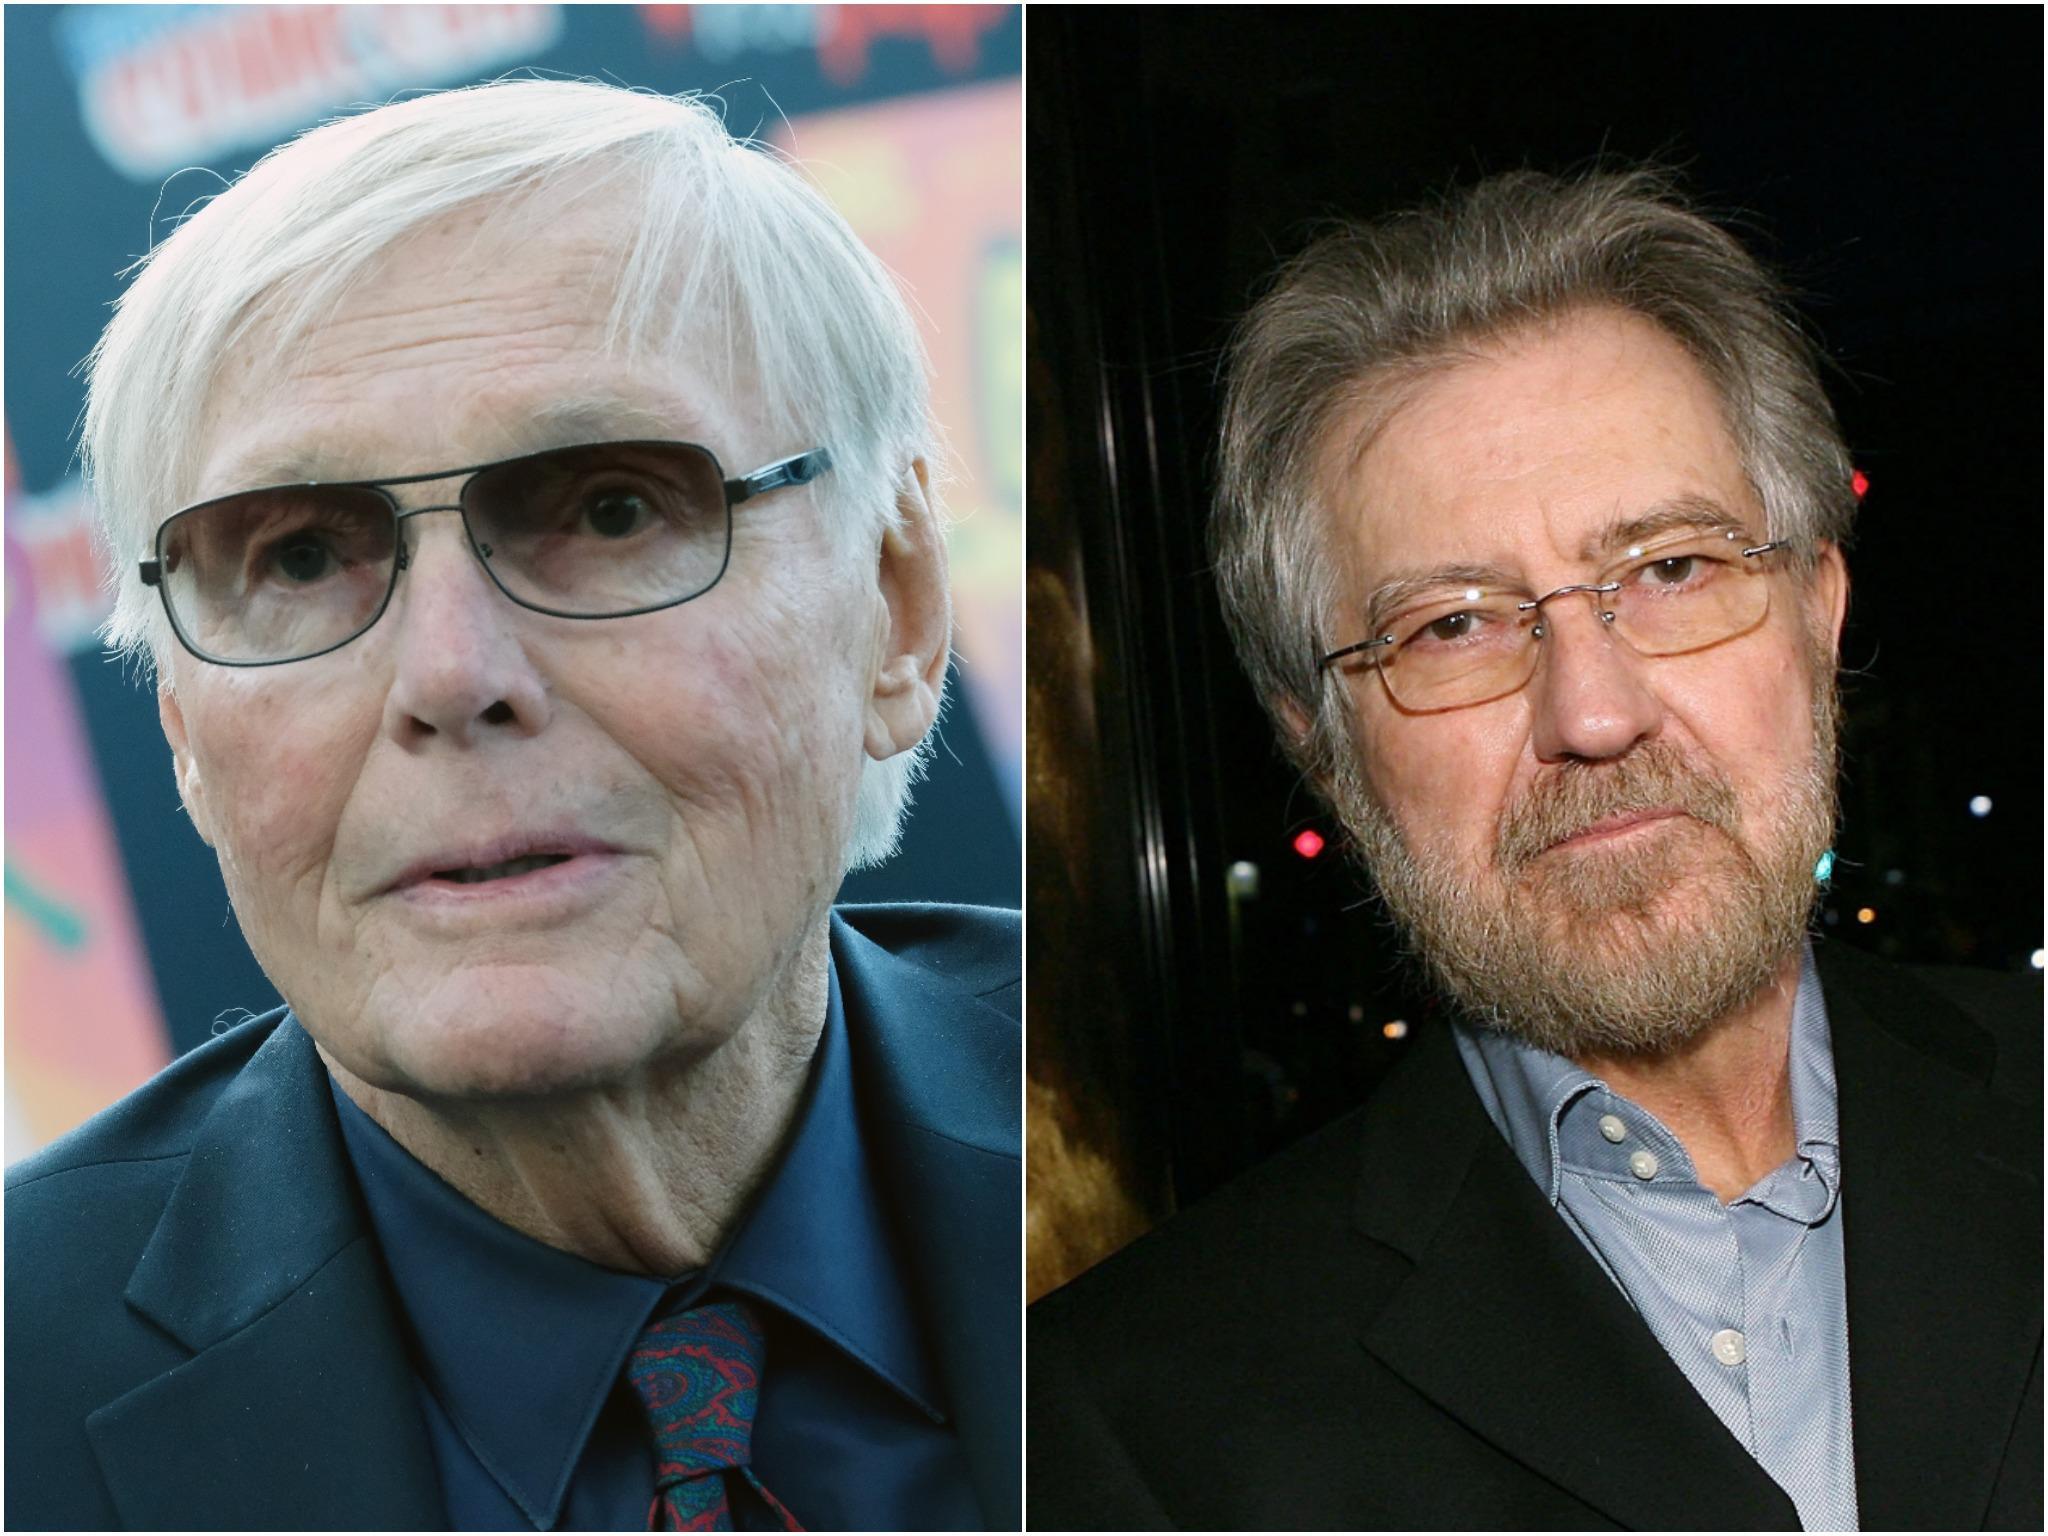 Adam West and Tobe Hooper, who were both omitted from the Oscars 'In Memoriam'